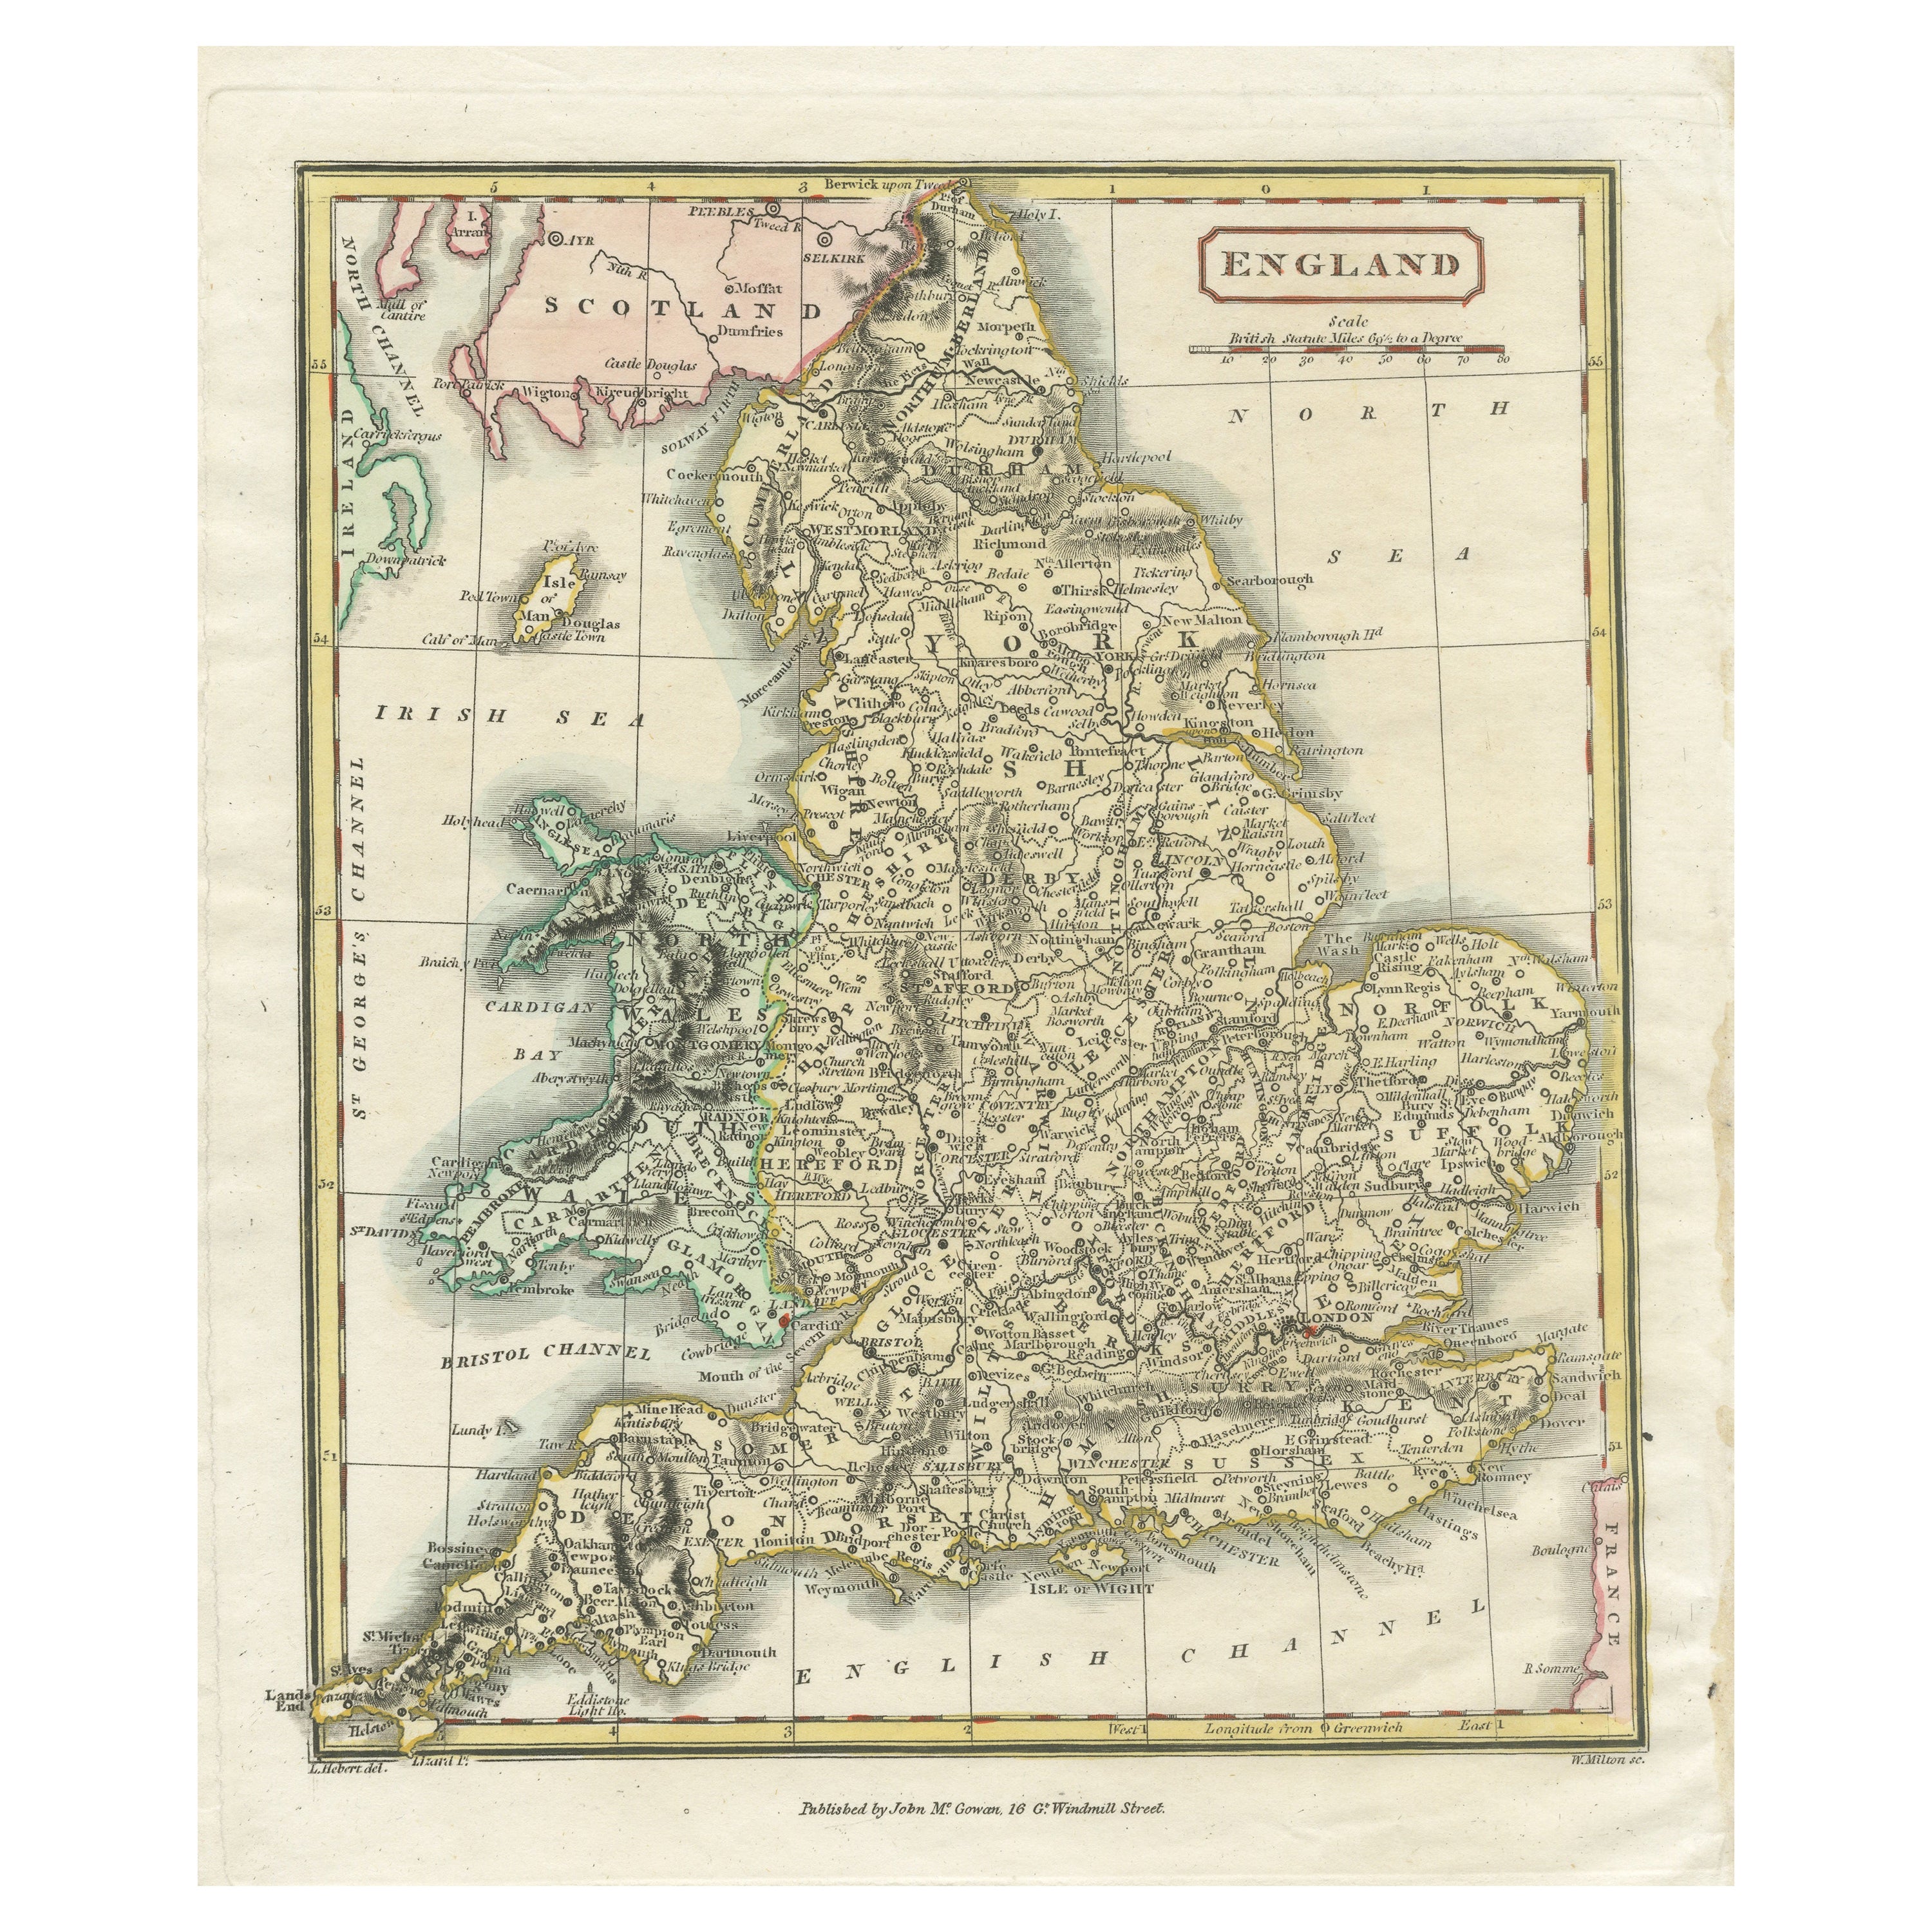 Original Antique Map of England with Hand Coloring